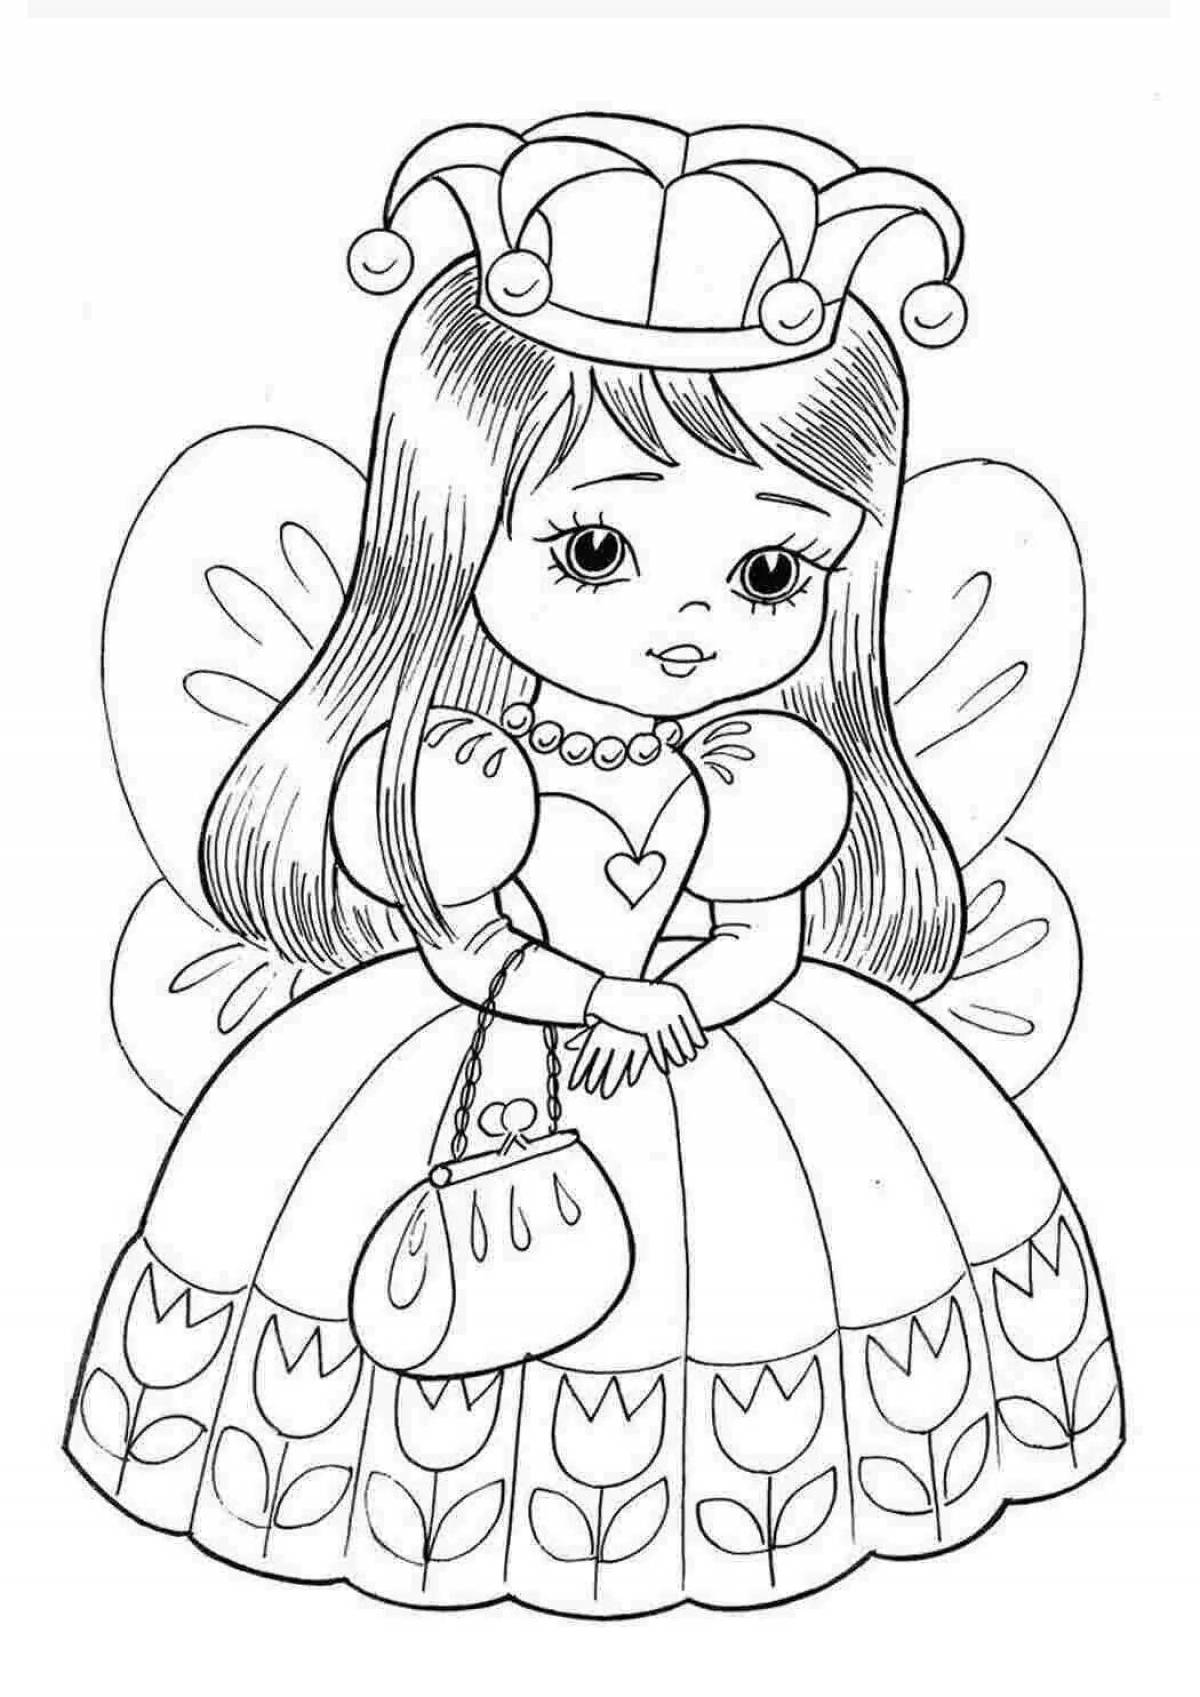 Cute princess coloring pages for girls 4 years old